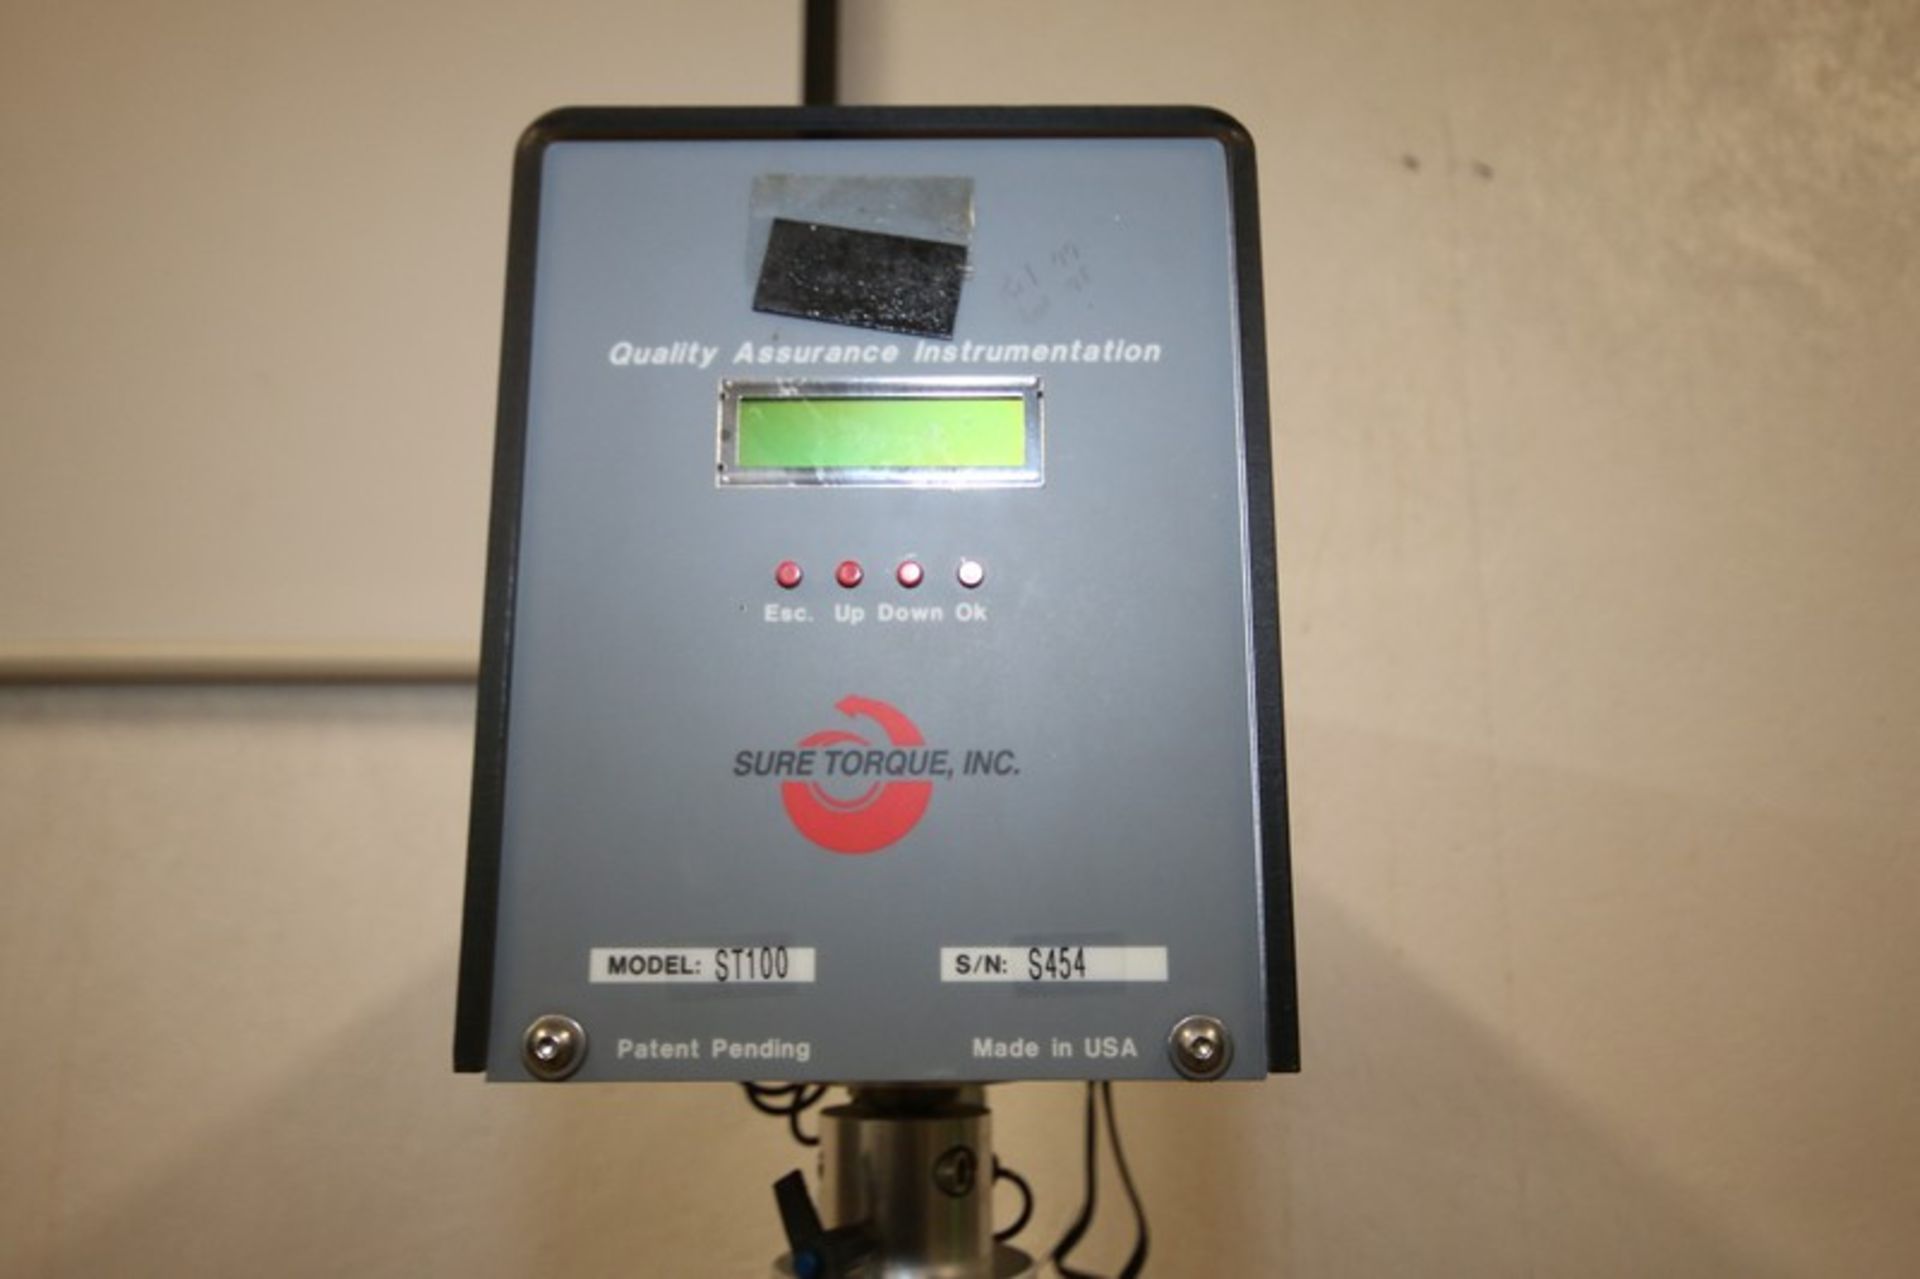 Sure Torque Inc. Torque Tester, Model ST100, SN 5454, 110V (INV#66952) (Located @ the MDG Auction - Image 5 of 6